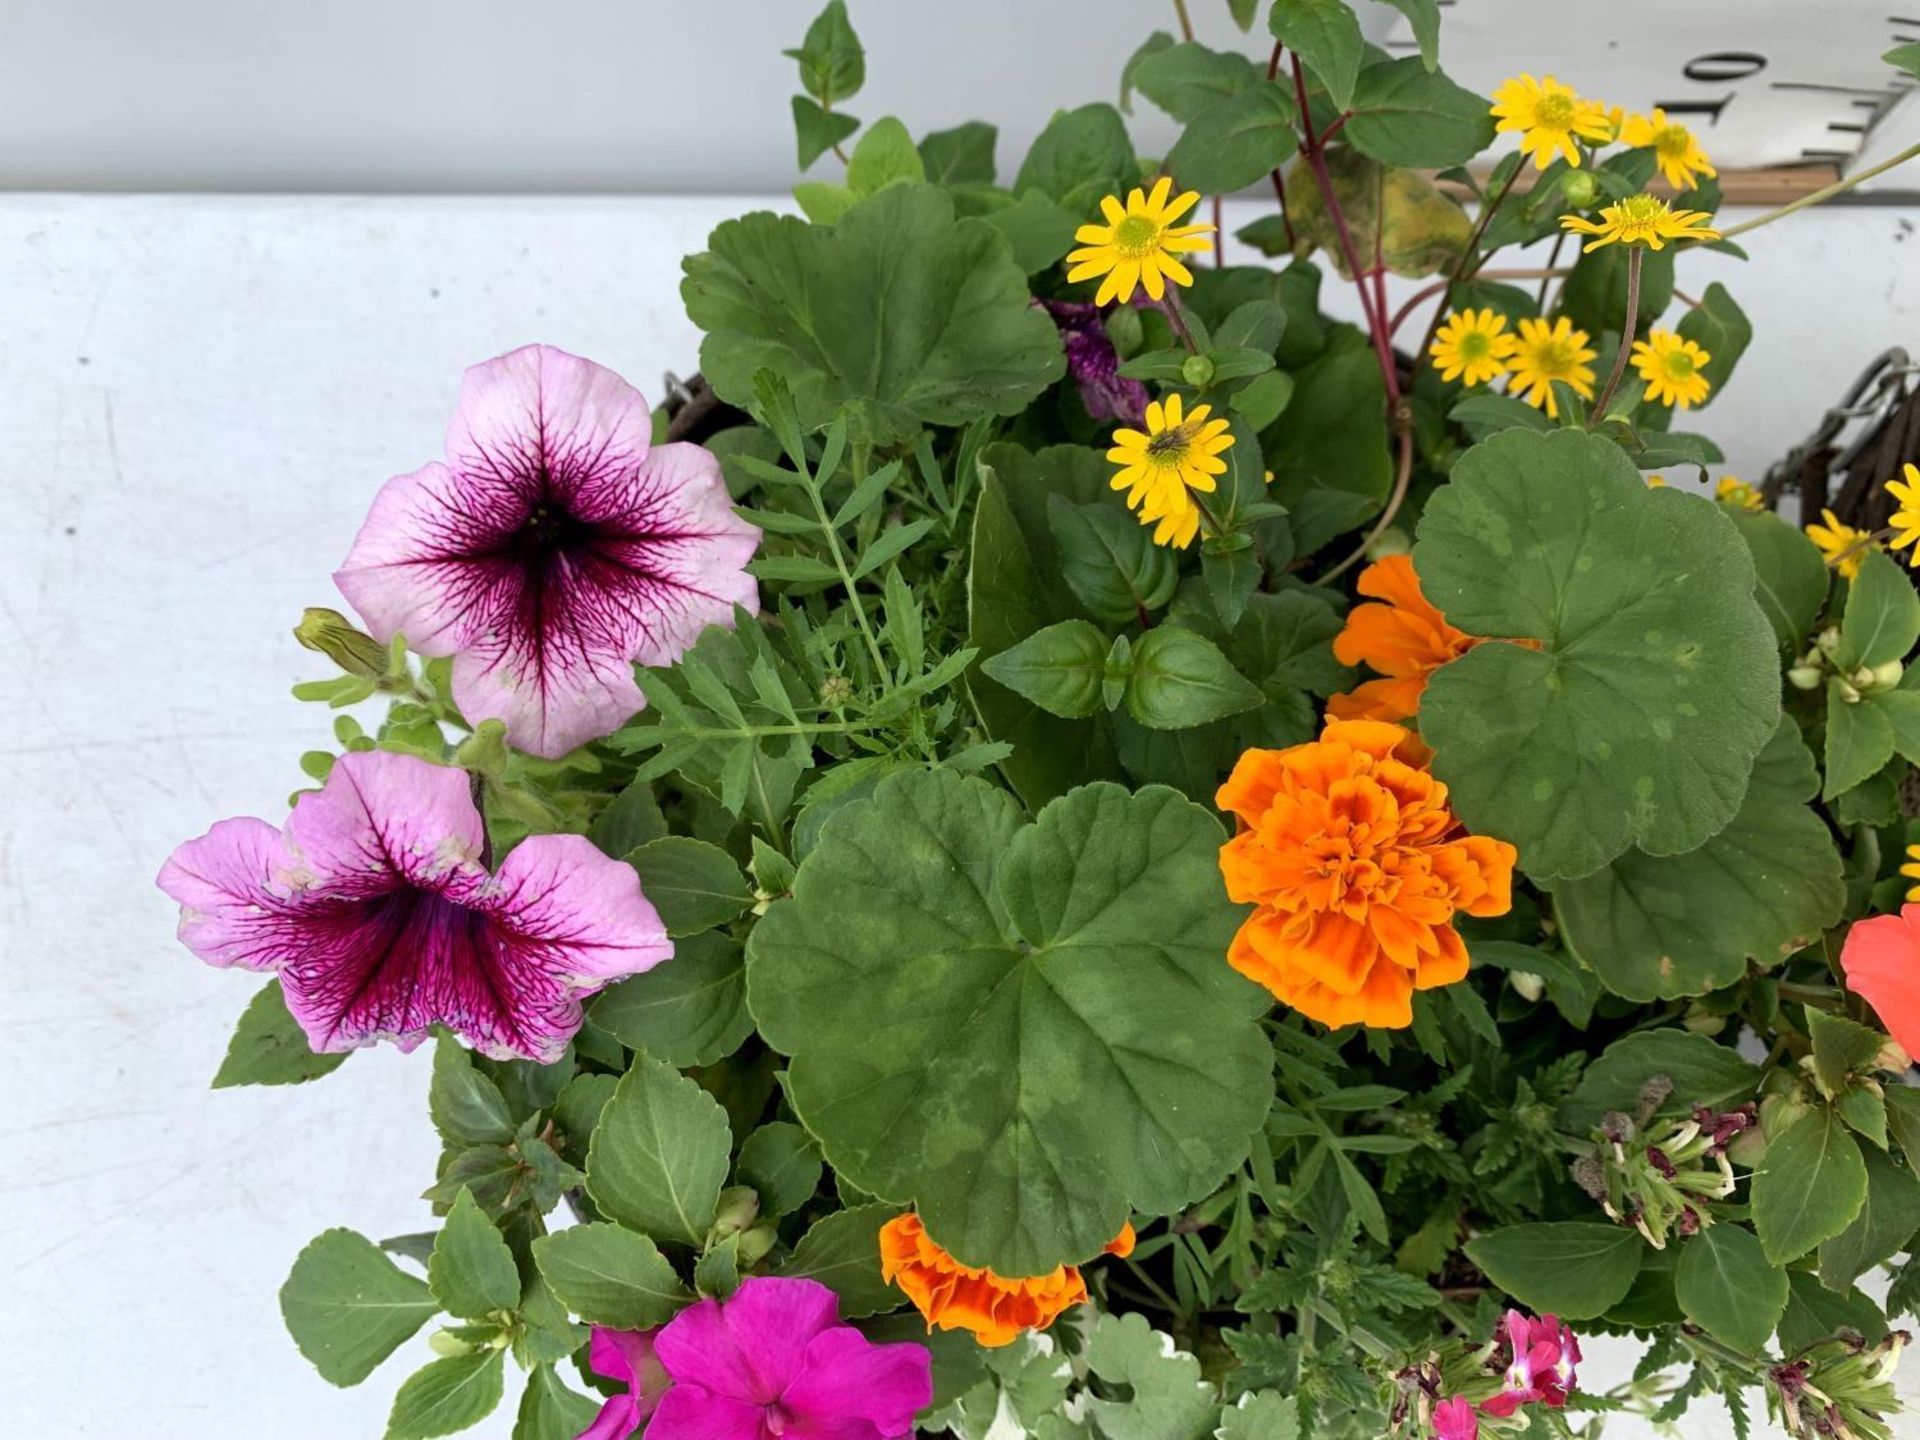 TWO WICKER HANGING BASKETS PLANTED WITH VARIOUS BEDDING PLANTS INCLUDING MARIGOLD PETUNIA VERBENA - Image 6 of 8